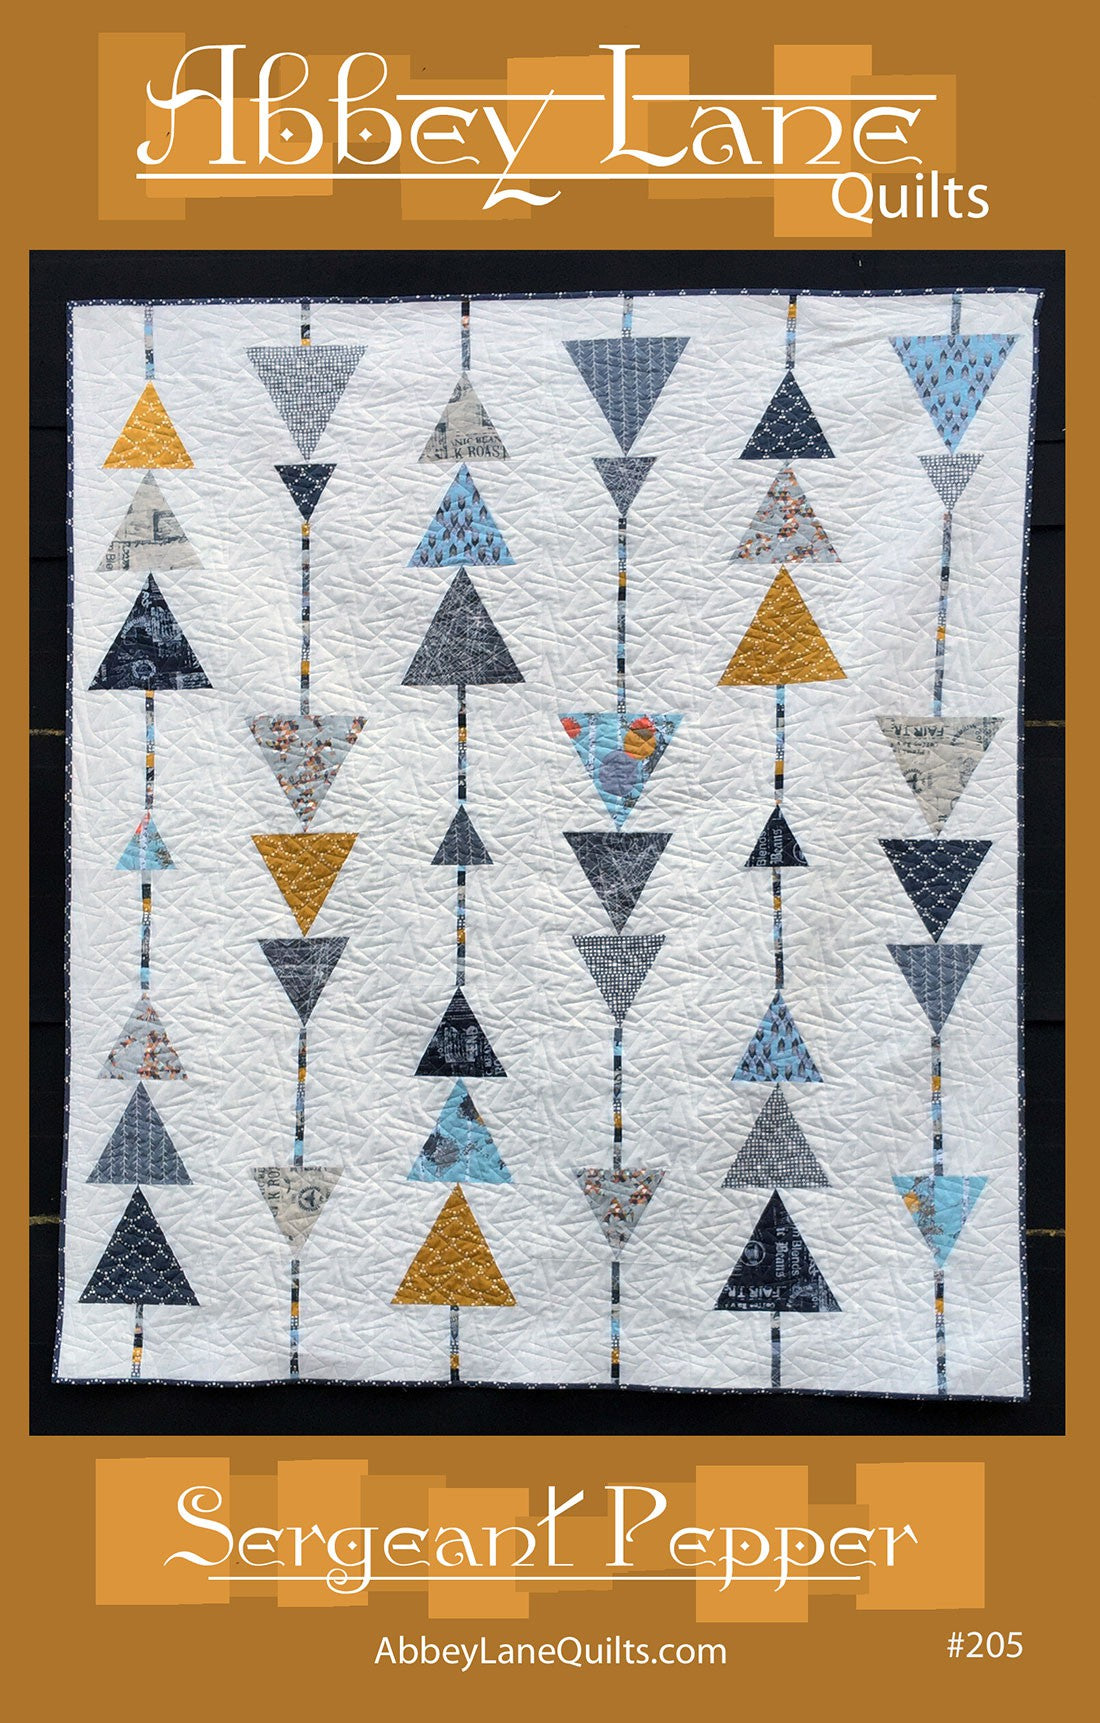 Sergeant Pepper Quilt Pattern by Marcea Owen and Janice Liljenquist for Abbey Lane Quilts